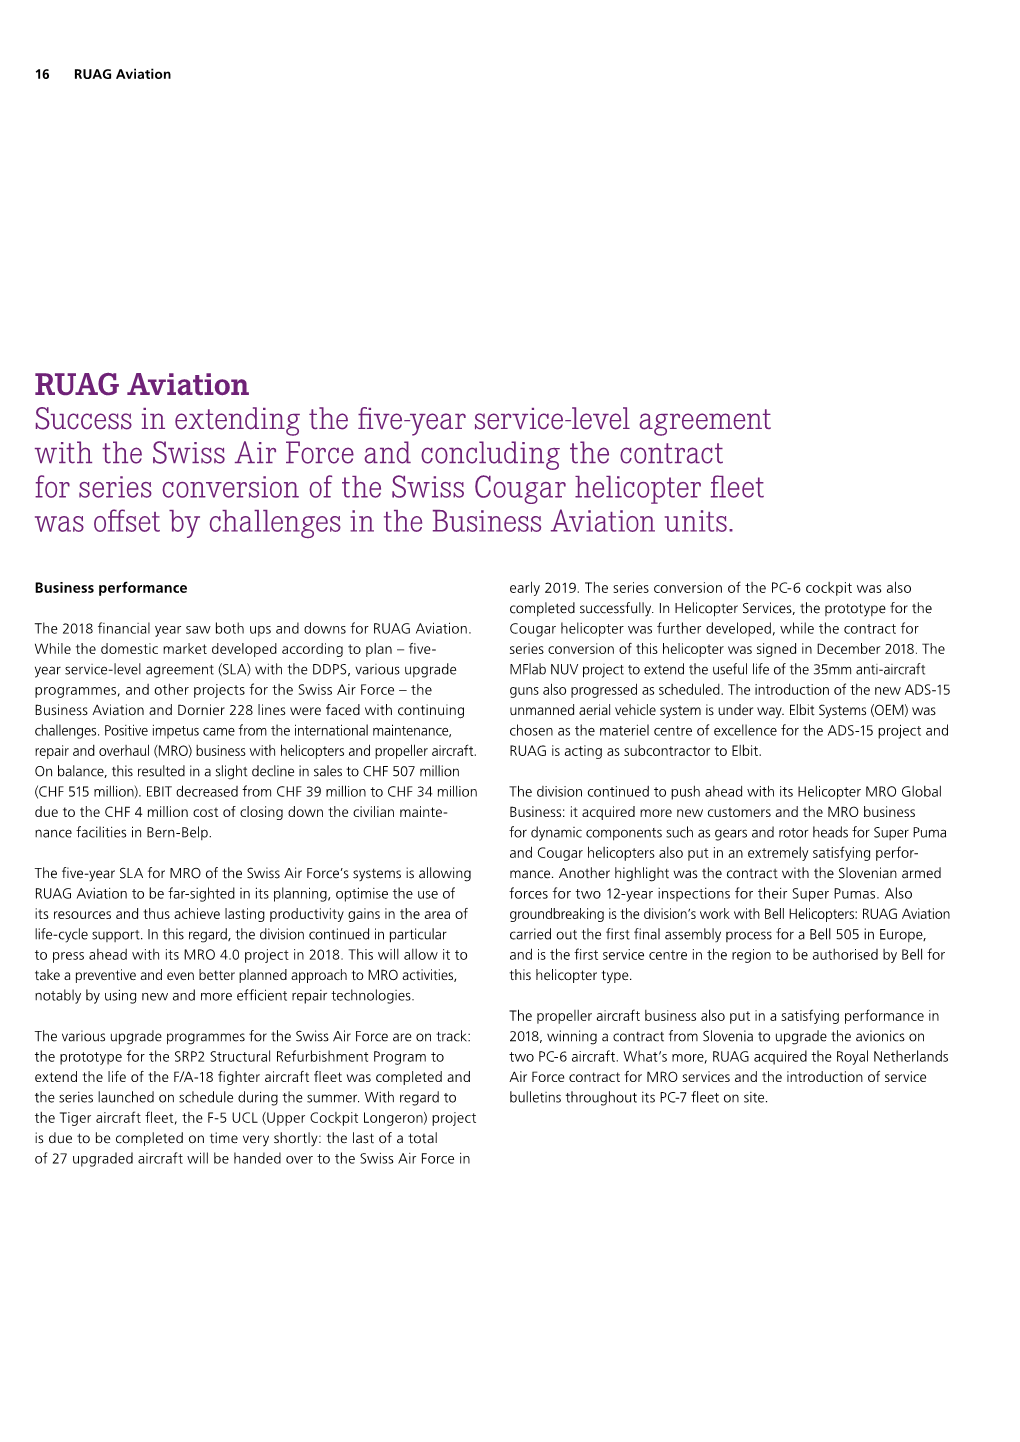 RUAG Aviation Success in Extending the Five-Year Service-Level